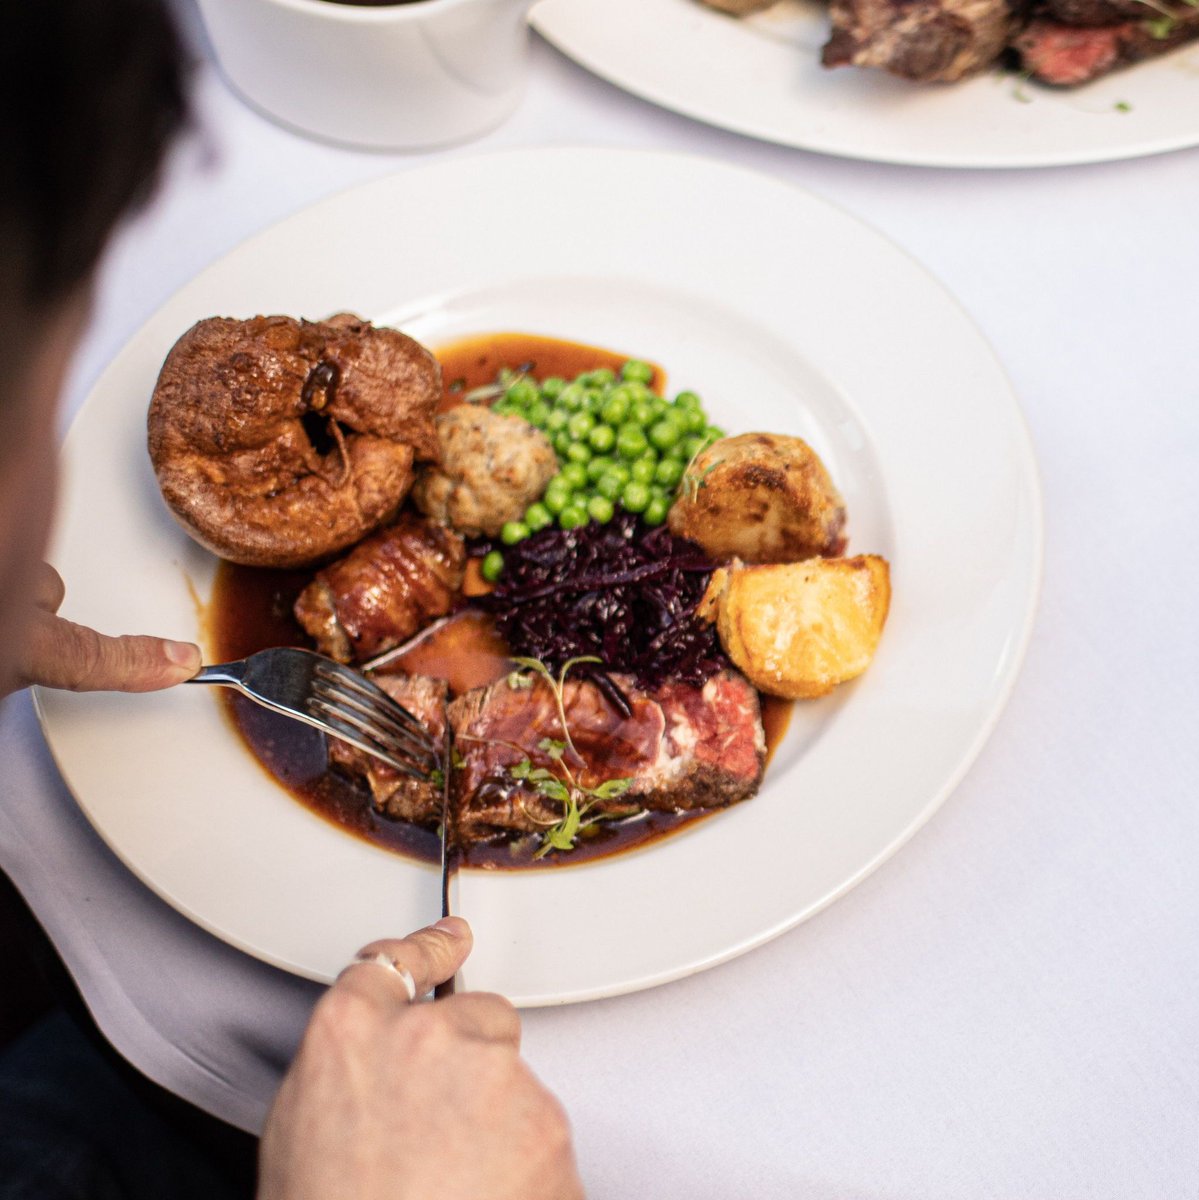 Indulge in the ultimate Sunday dining experience with our irresistible offer at Marco Pierre White Steakhouse, Bristol : 25% off Sunday Lunches throughout May! 🍽️ Offer ends on 31st May. Book your table now: 01934 834 343 or visit: buff.ly/3CeOhDH #Food #MPW #Bristol